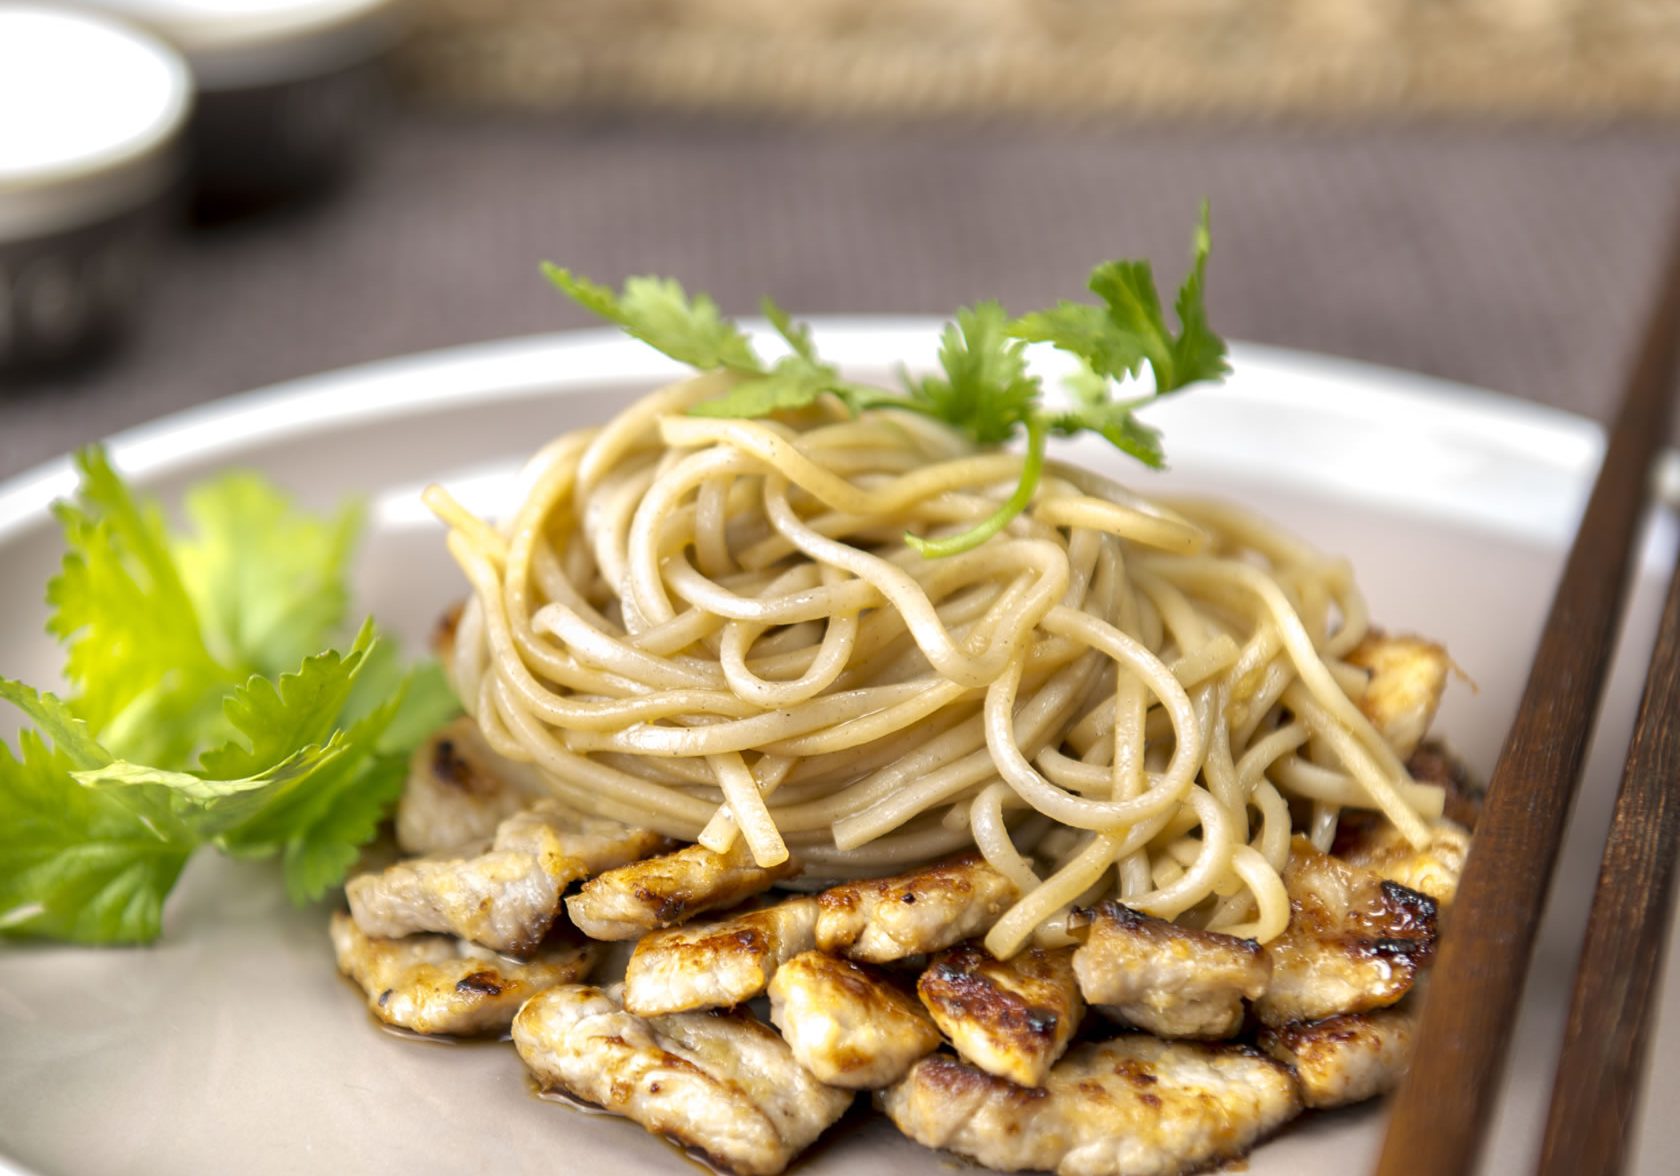 36.Cold_Port_Slices_with_Soba_Noodles_and_Garlic_Sauce